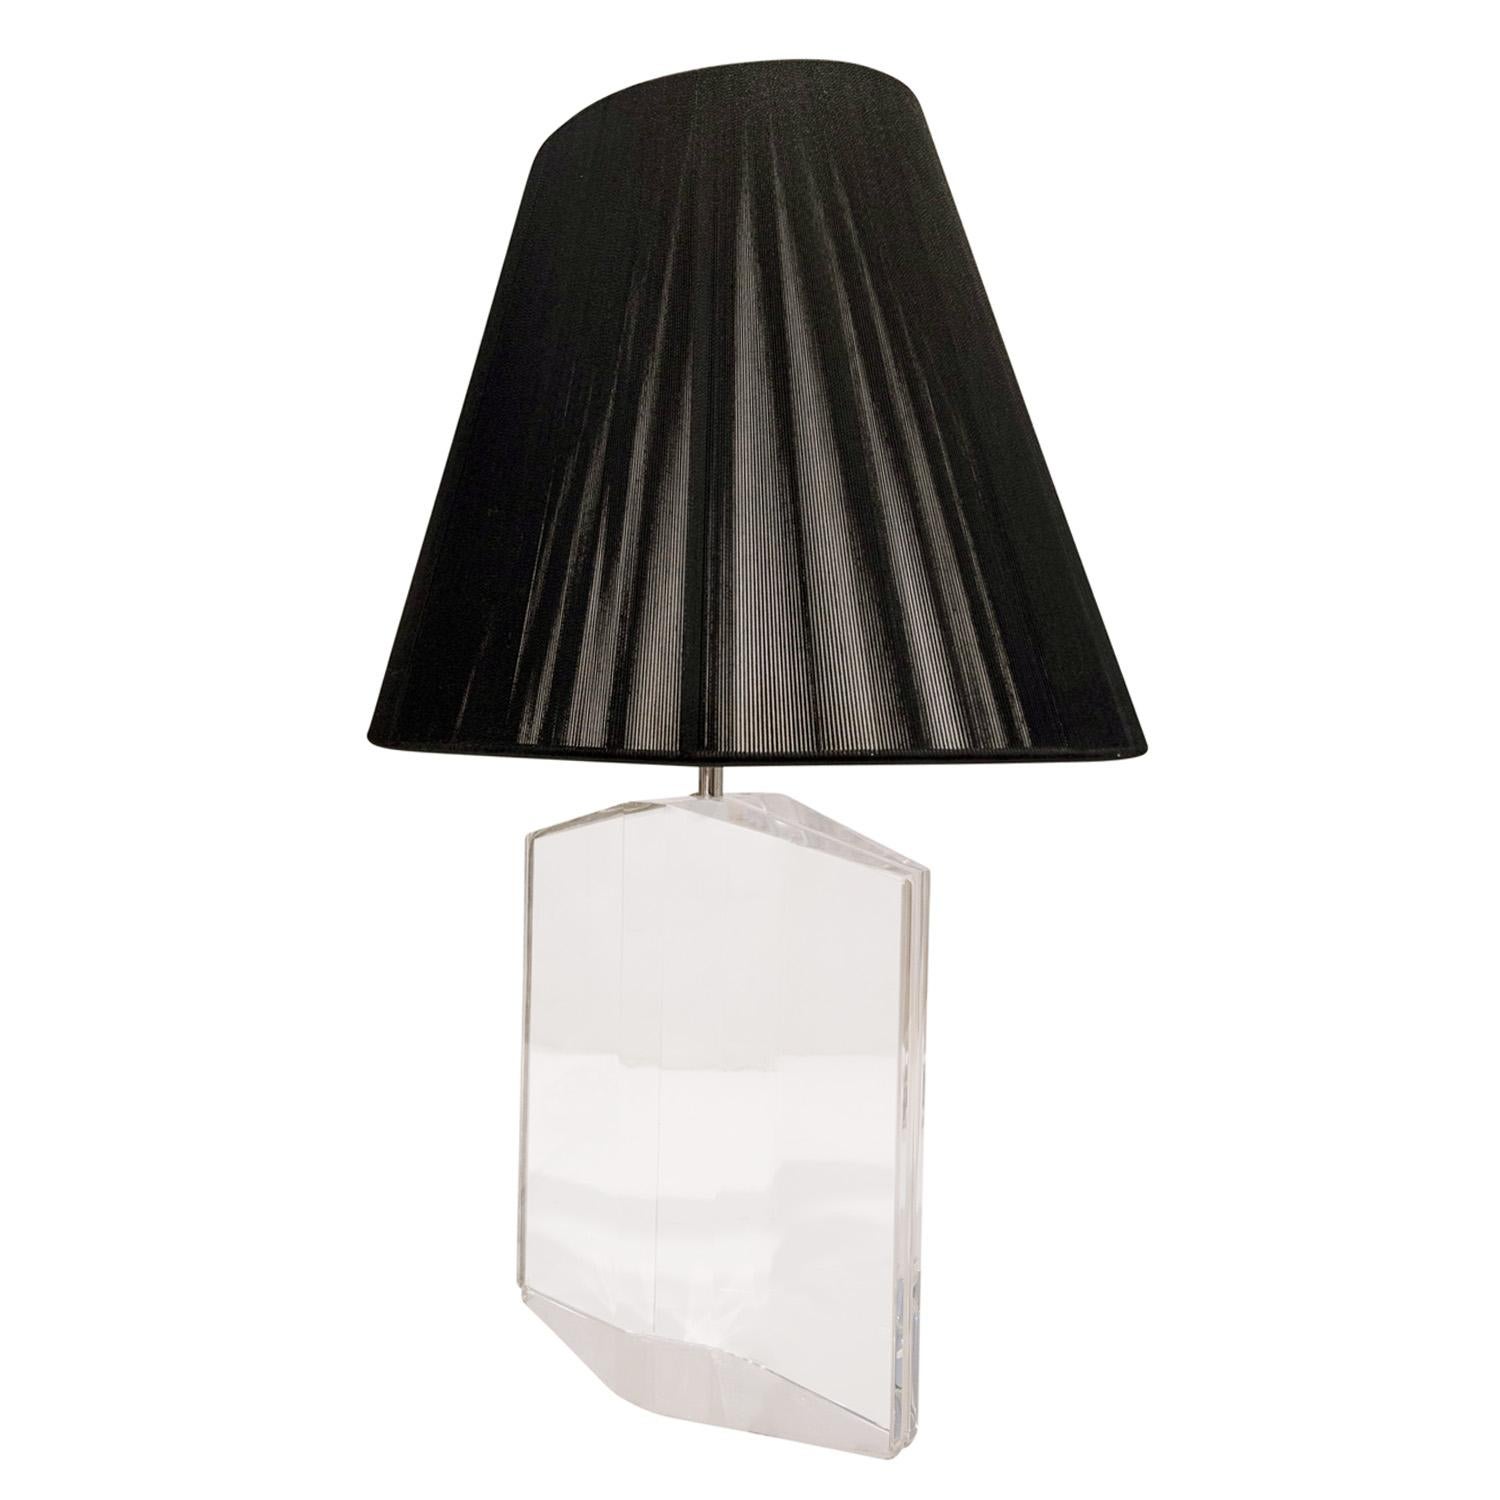 Mid-Century Modern Les Prismatiques Tapering Lucite Table Lamp with Chrome Hardware, 1970s For Sale